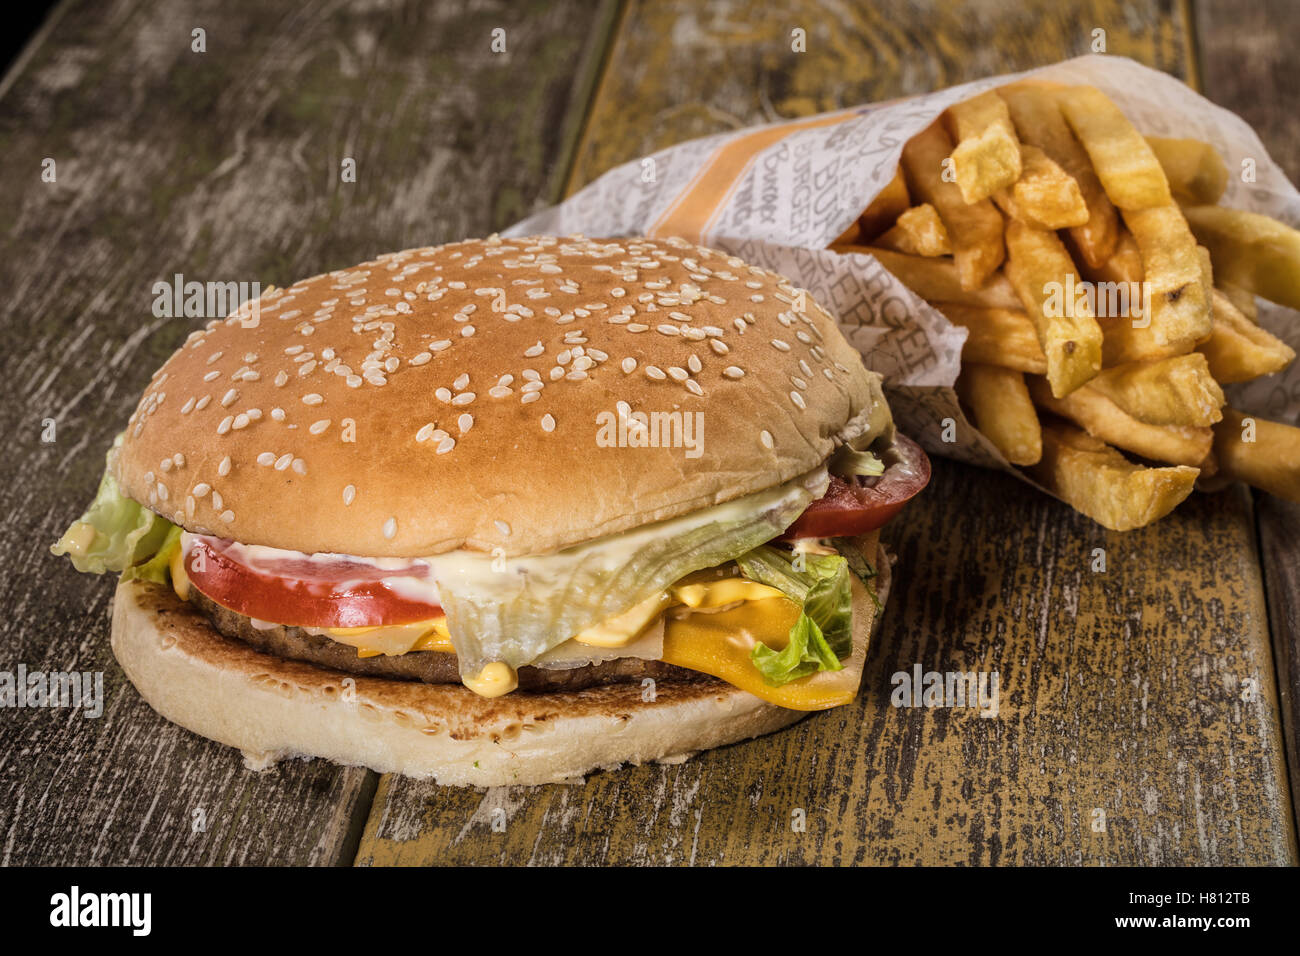 Hamburger and fried potato on an old wooden desk Stock Photo